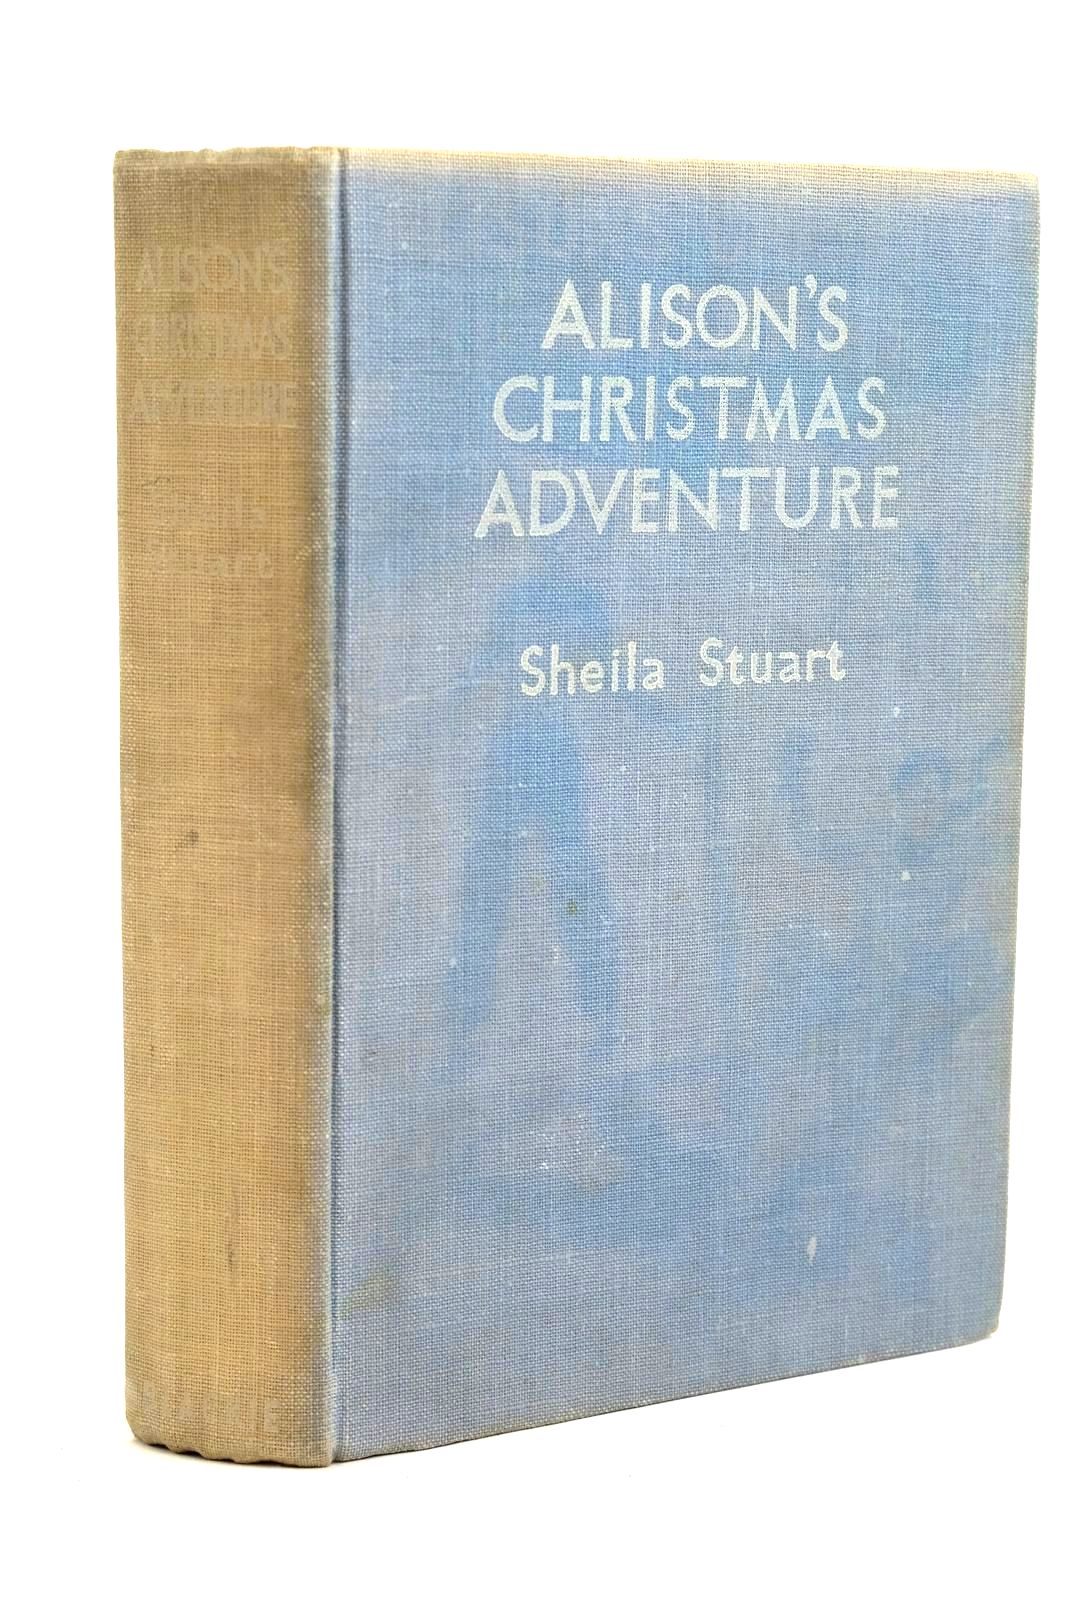 Photo of ALISON'S CHRISTMAS ADVENTURE written by Stuart, Sheila illustrated by Gervaise,  published by Blackie &amp; Son Ltd. (STOCK CODE: 1320710)  for sale by Stella & Rose's Books